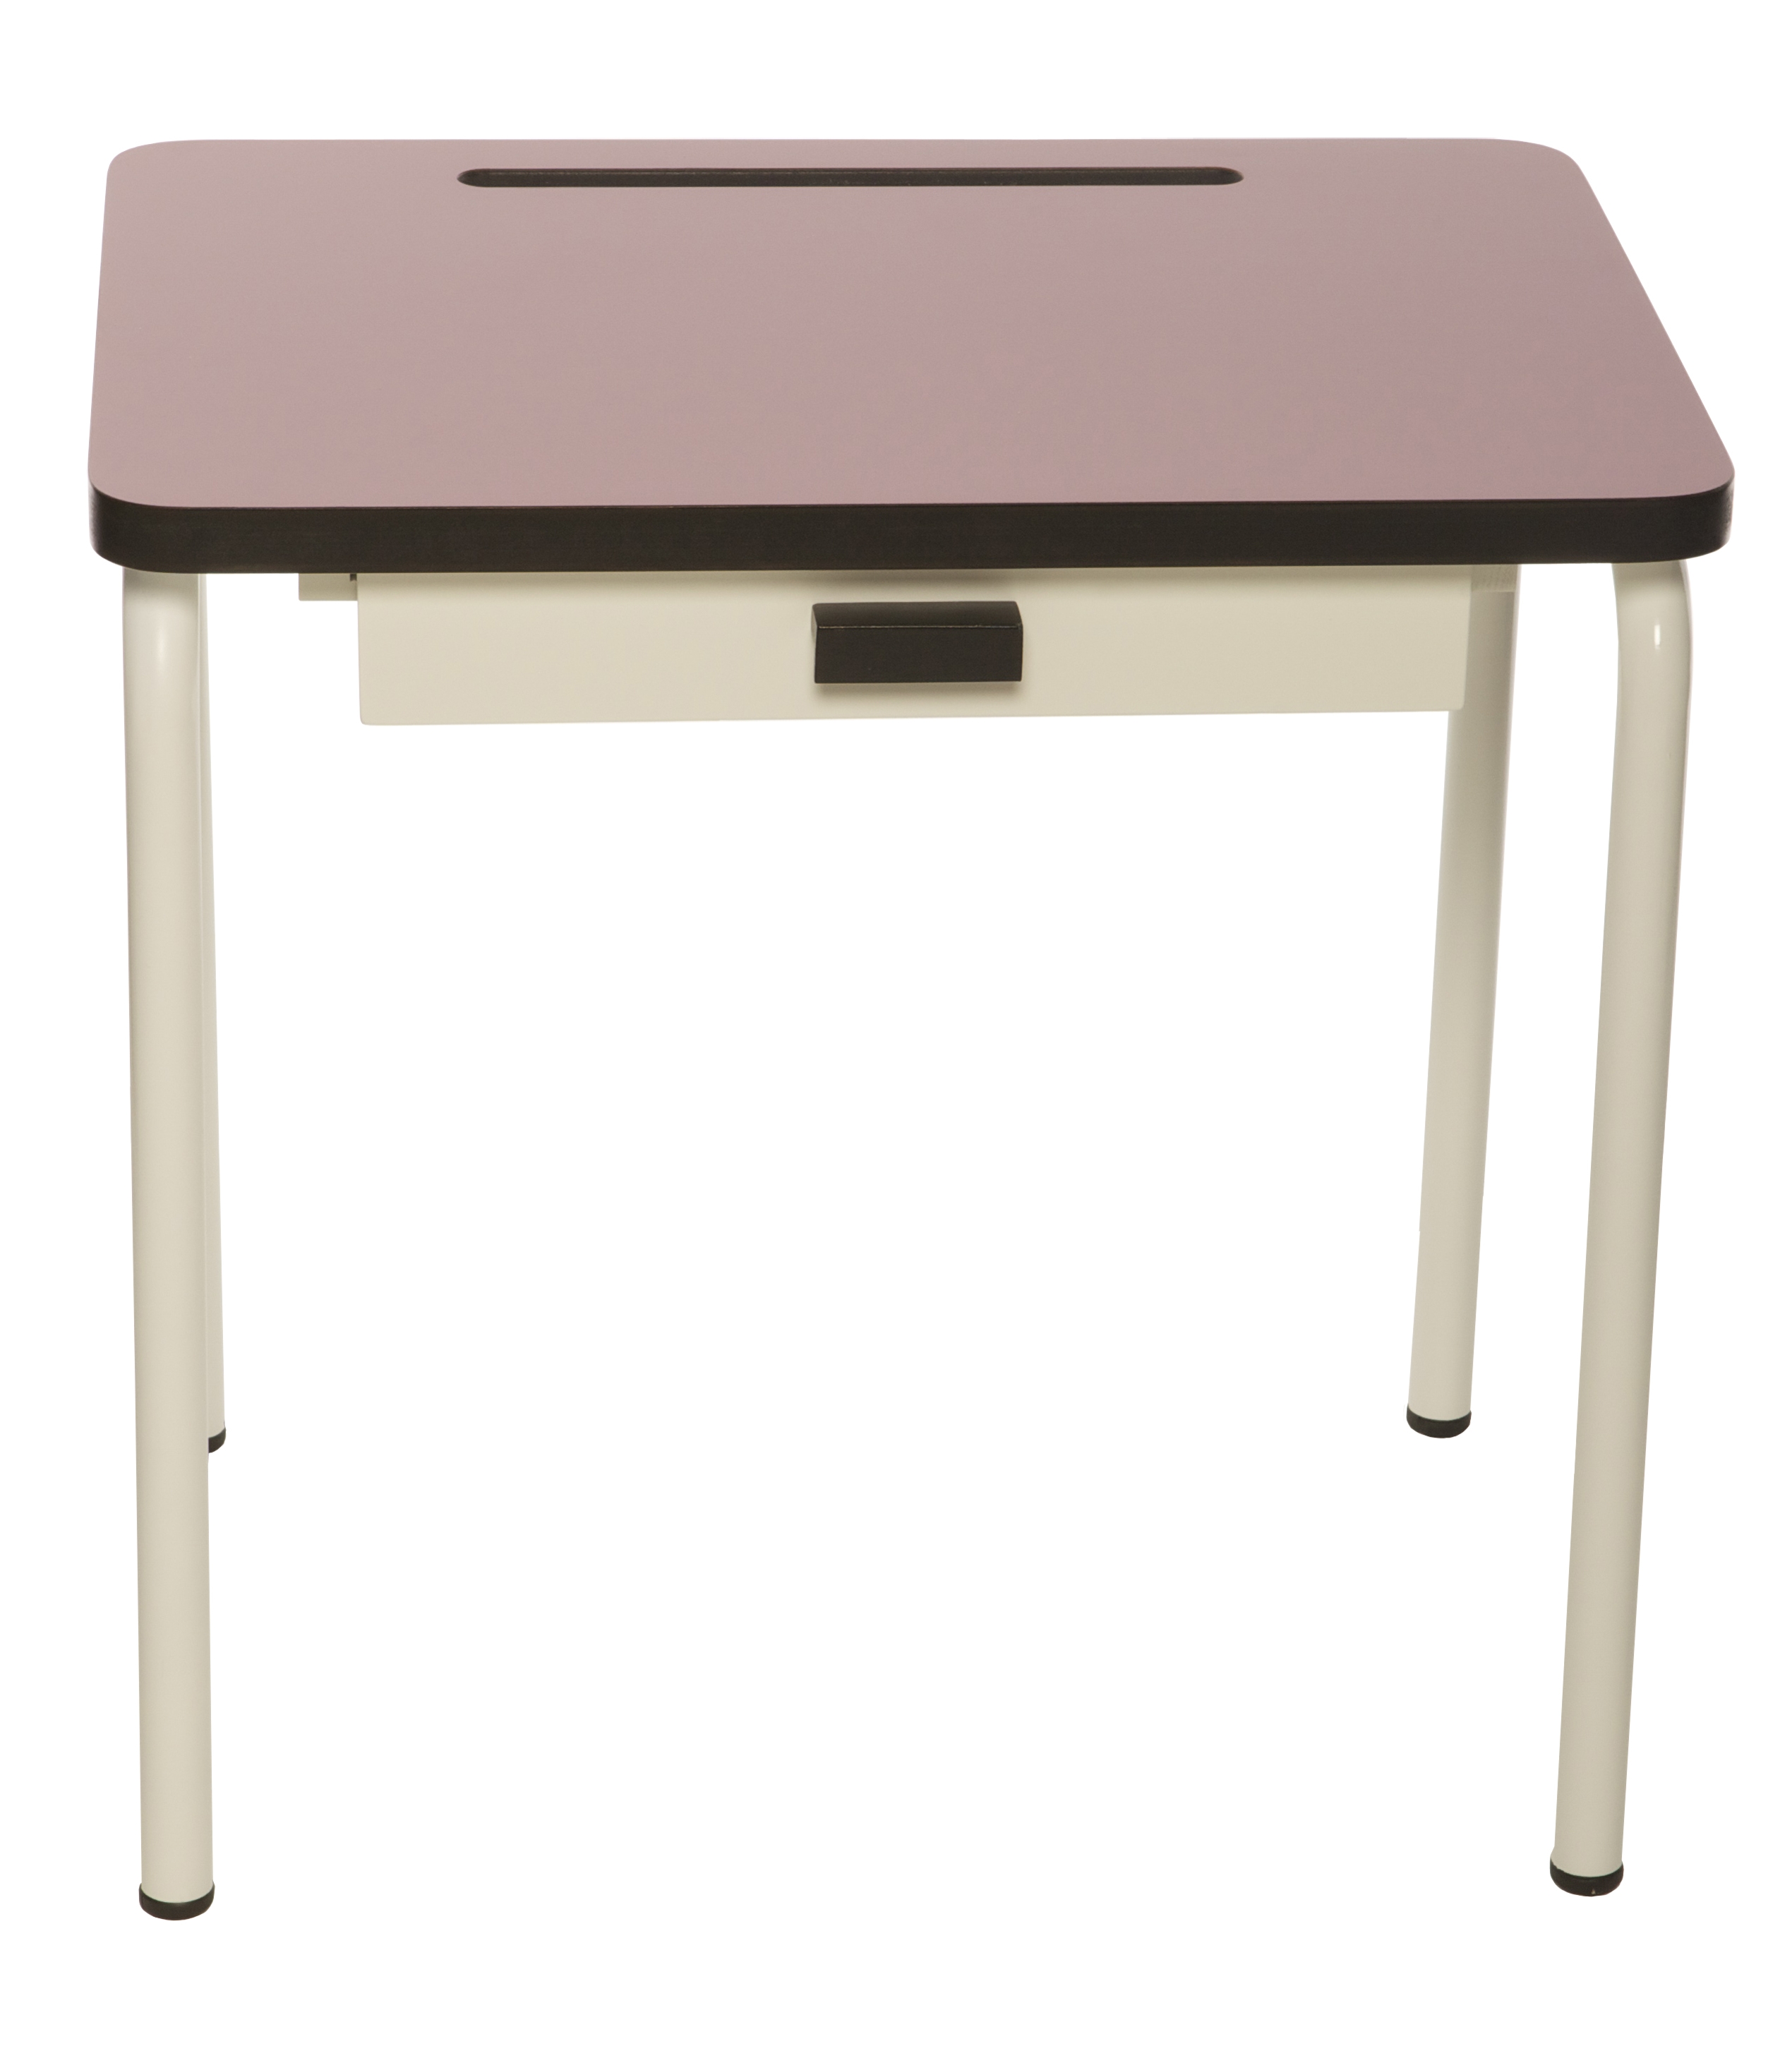 Design School Desk For Children Furniture With Retro Style Available At